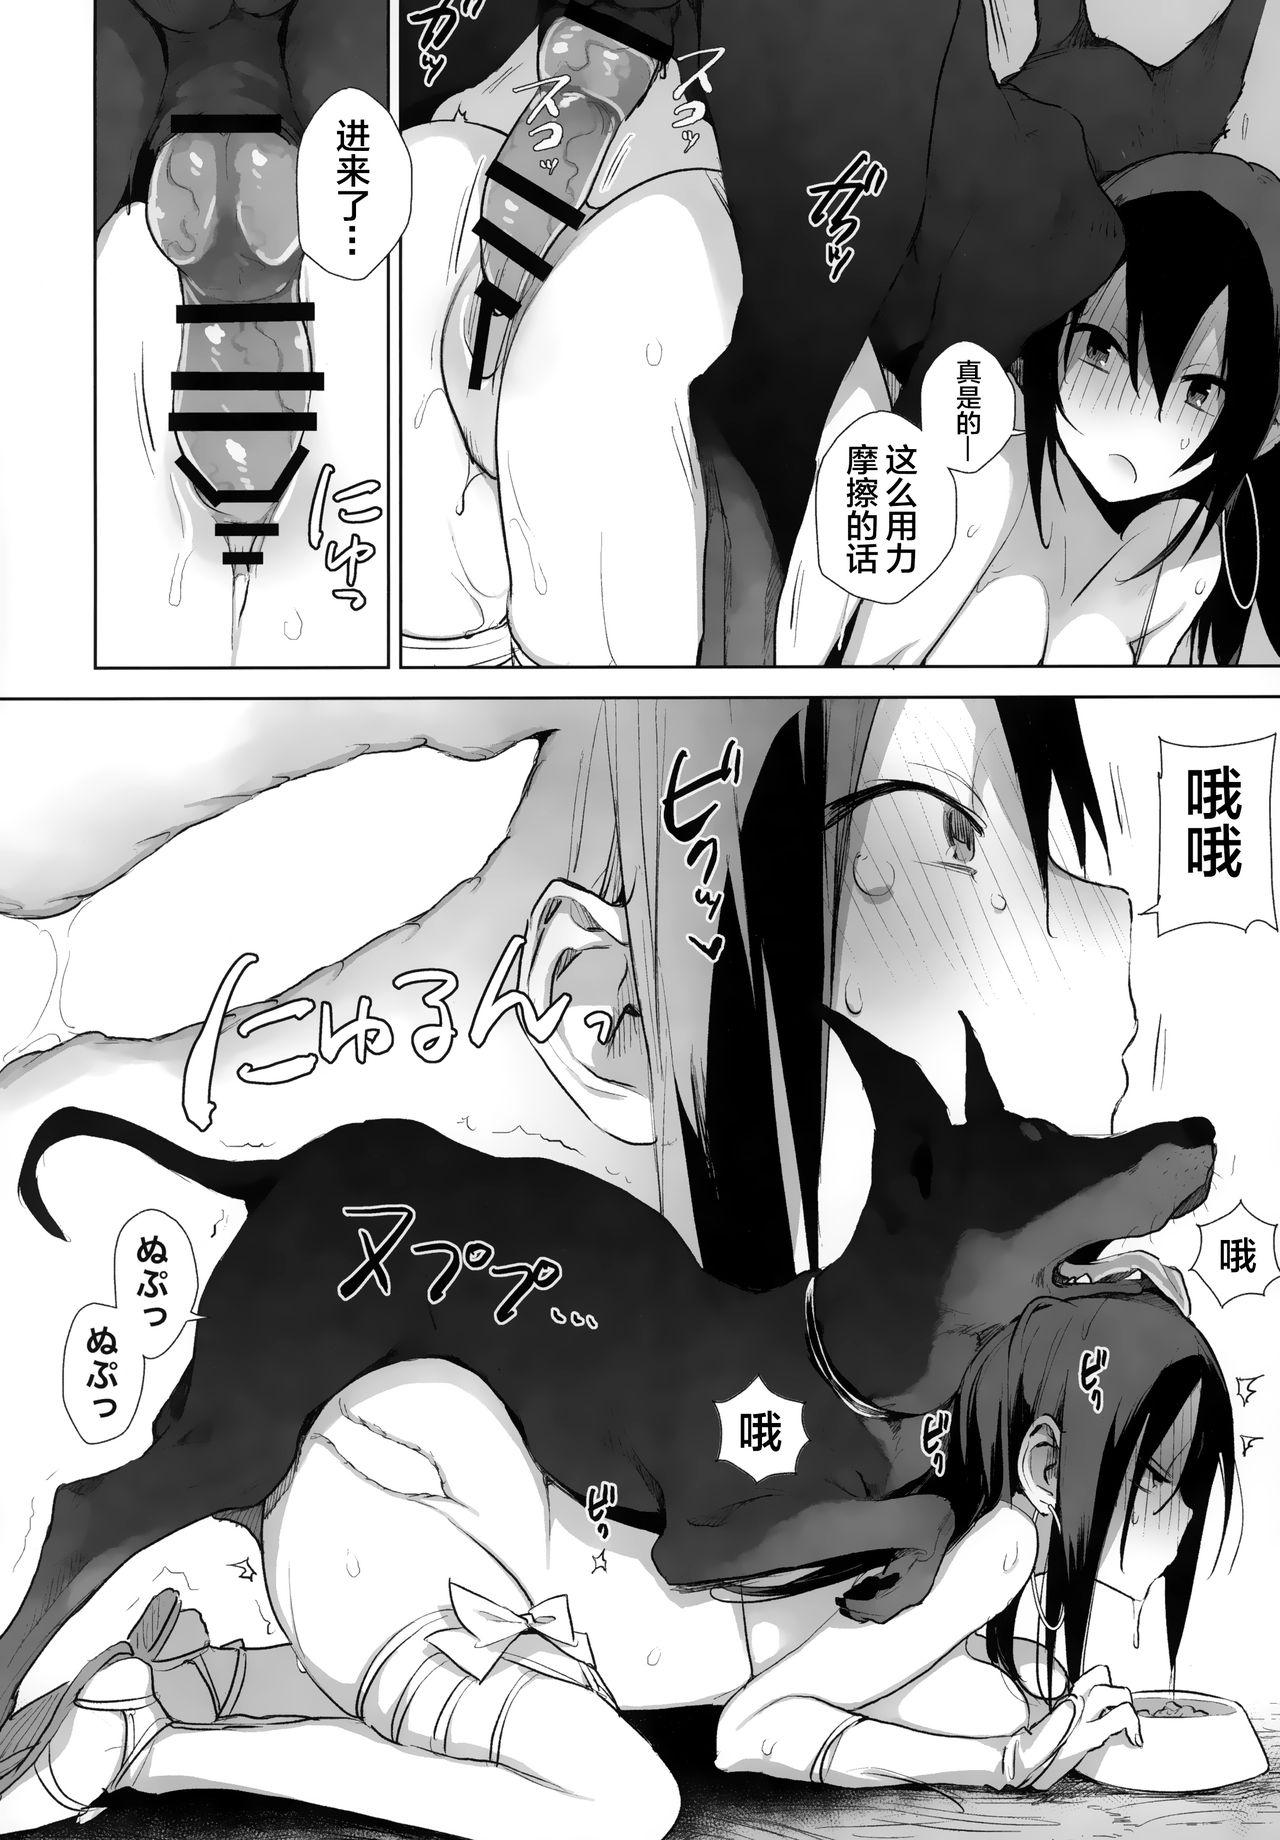 Boy Fuck Girl Sanzou-chan to Uma to Inu to Buta - Fate grand order Missionary Position Porn - Page 5